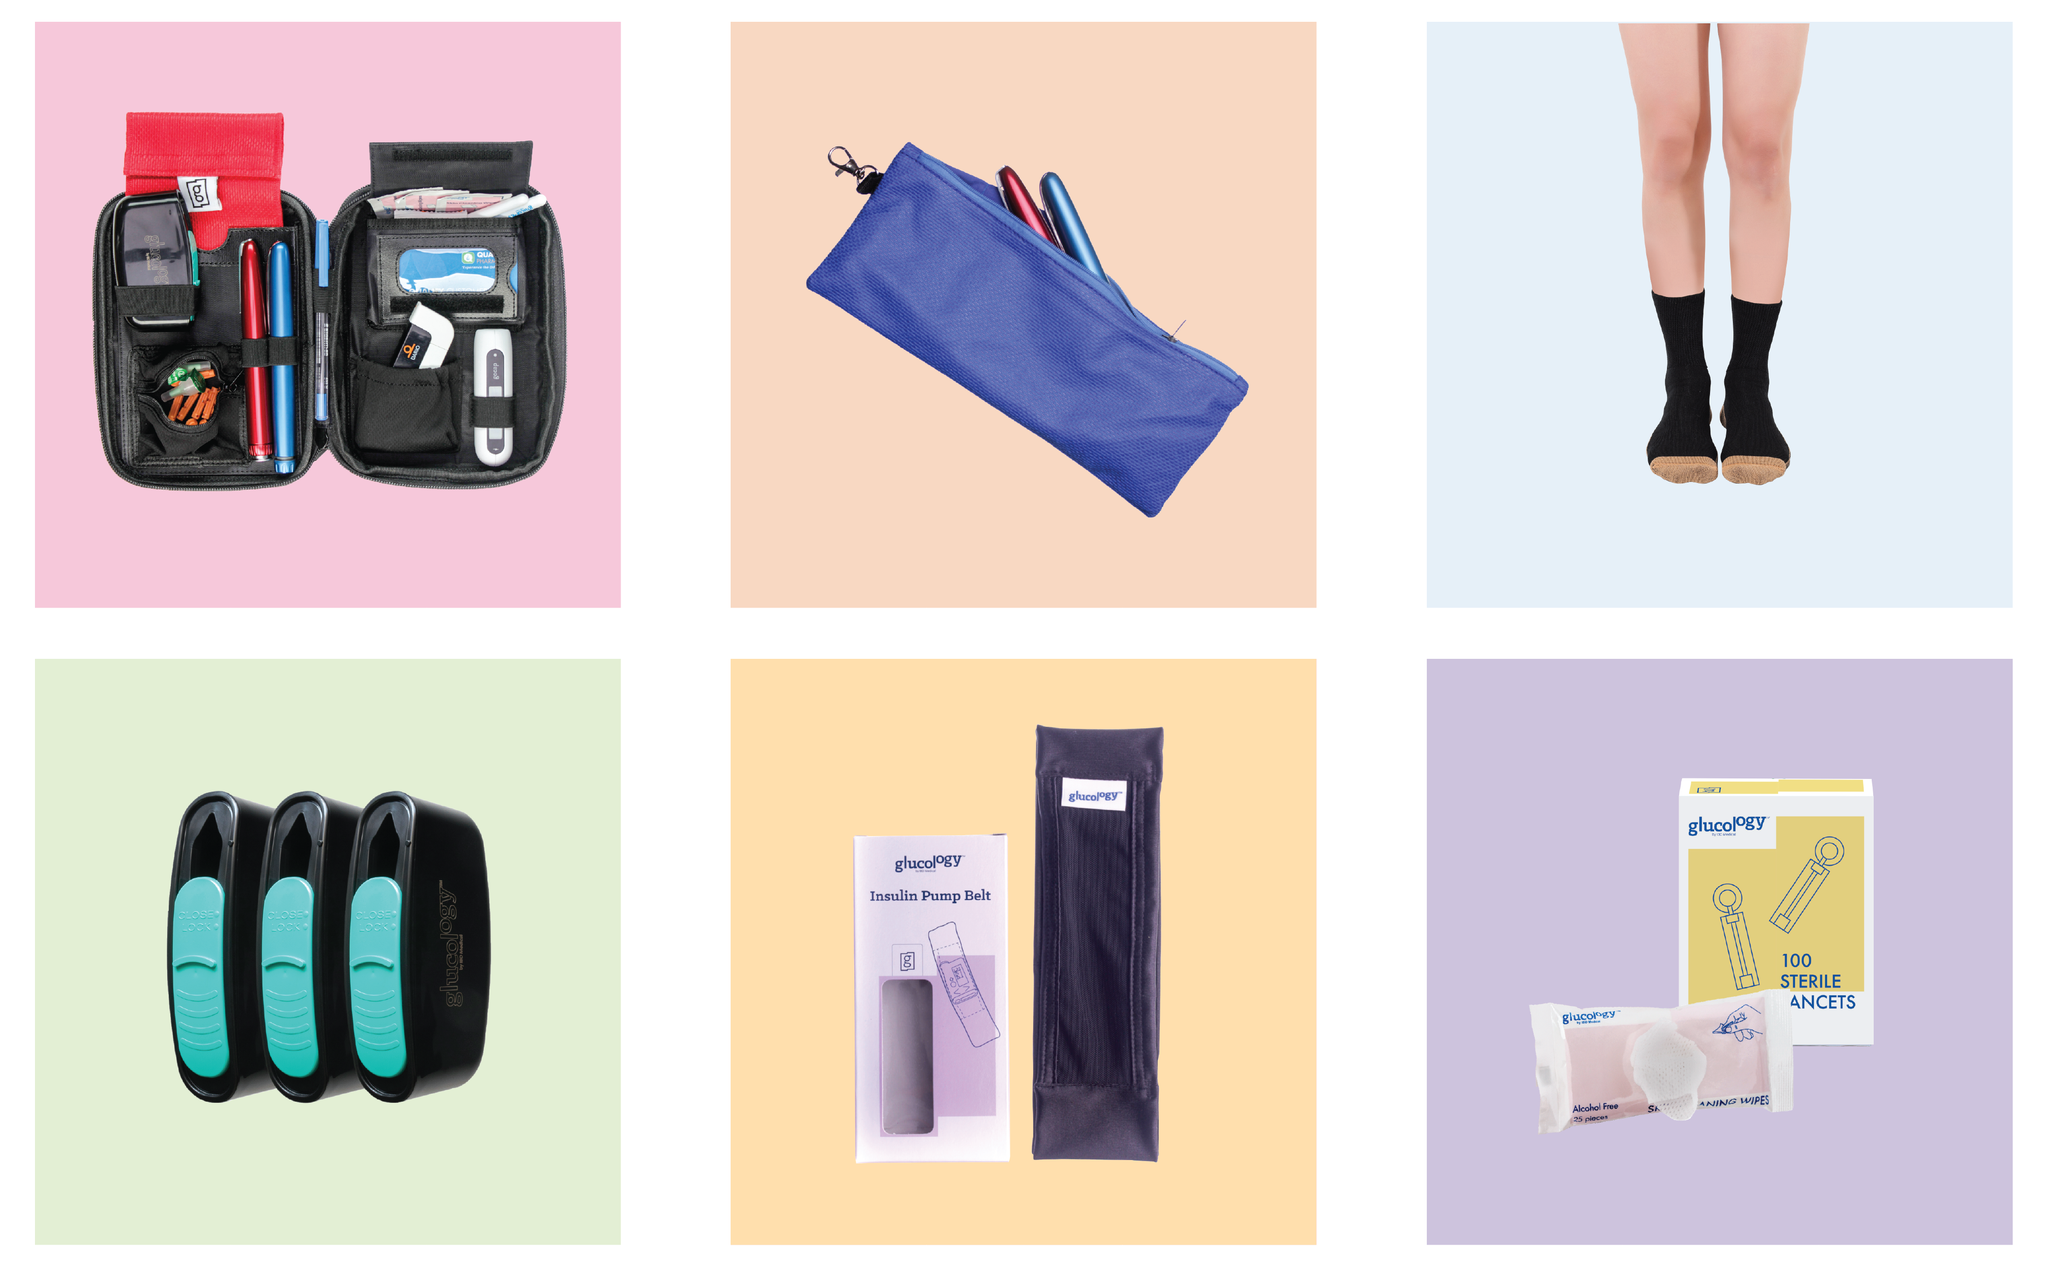 Diabetes support products accessories